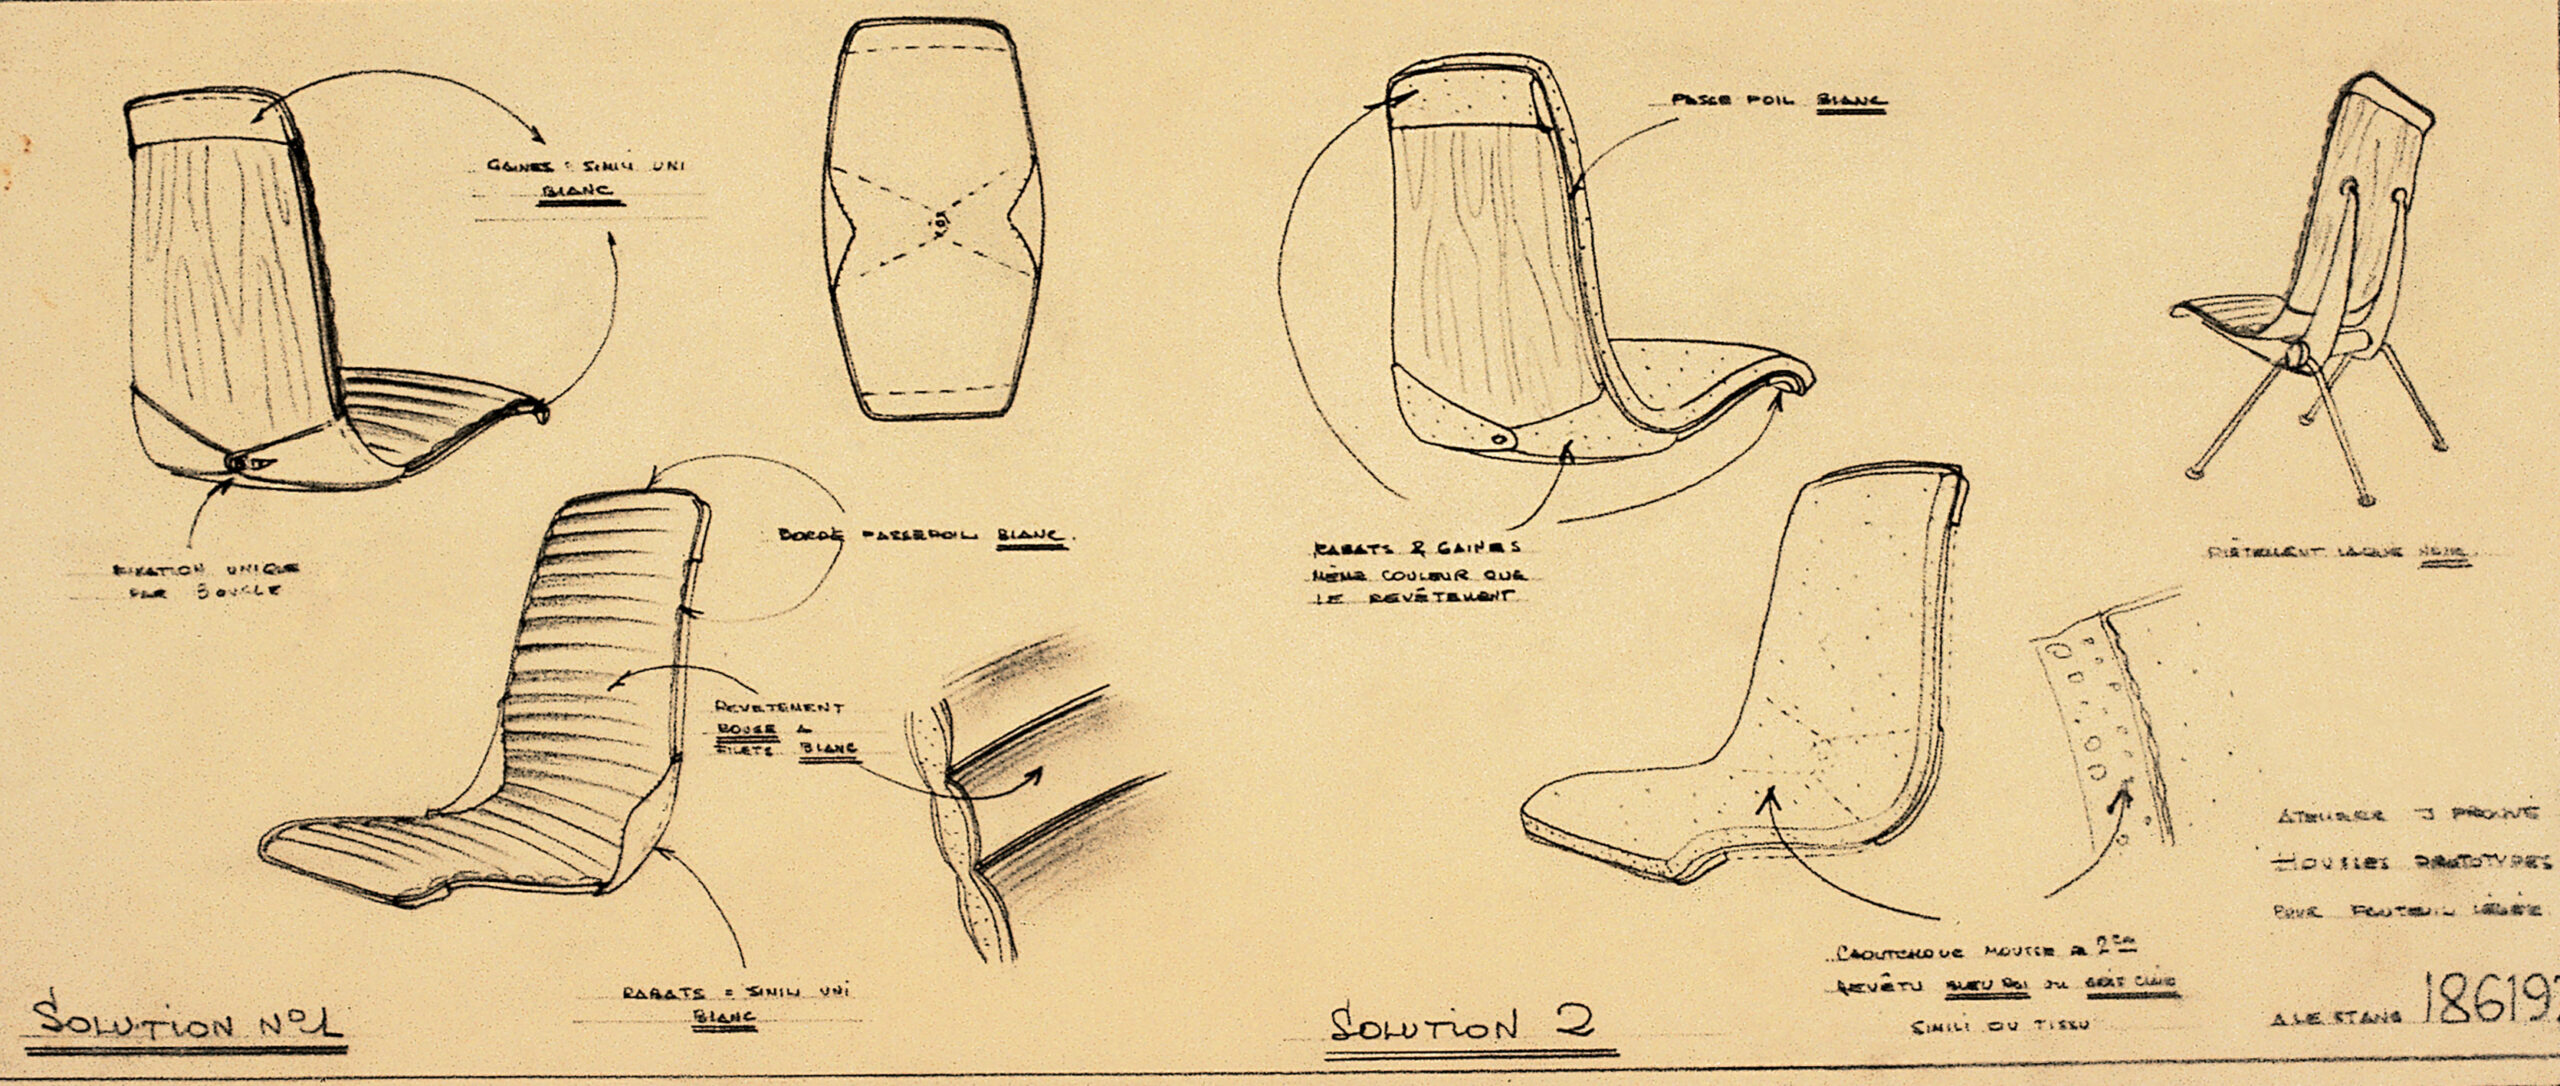 “Prototype covers for Demi-Repos armchair”. Ateliers Jean Prouvé drawing no. 186.197, September 1955, by A. Le Stang.